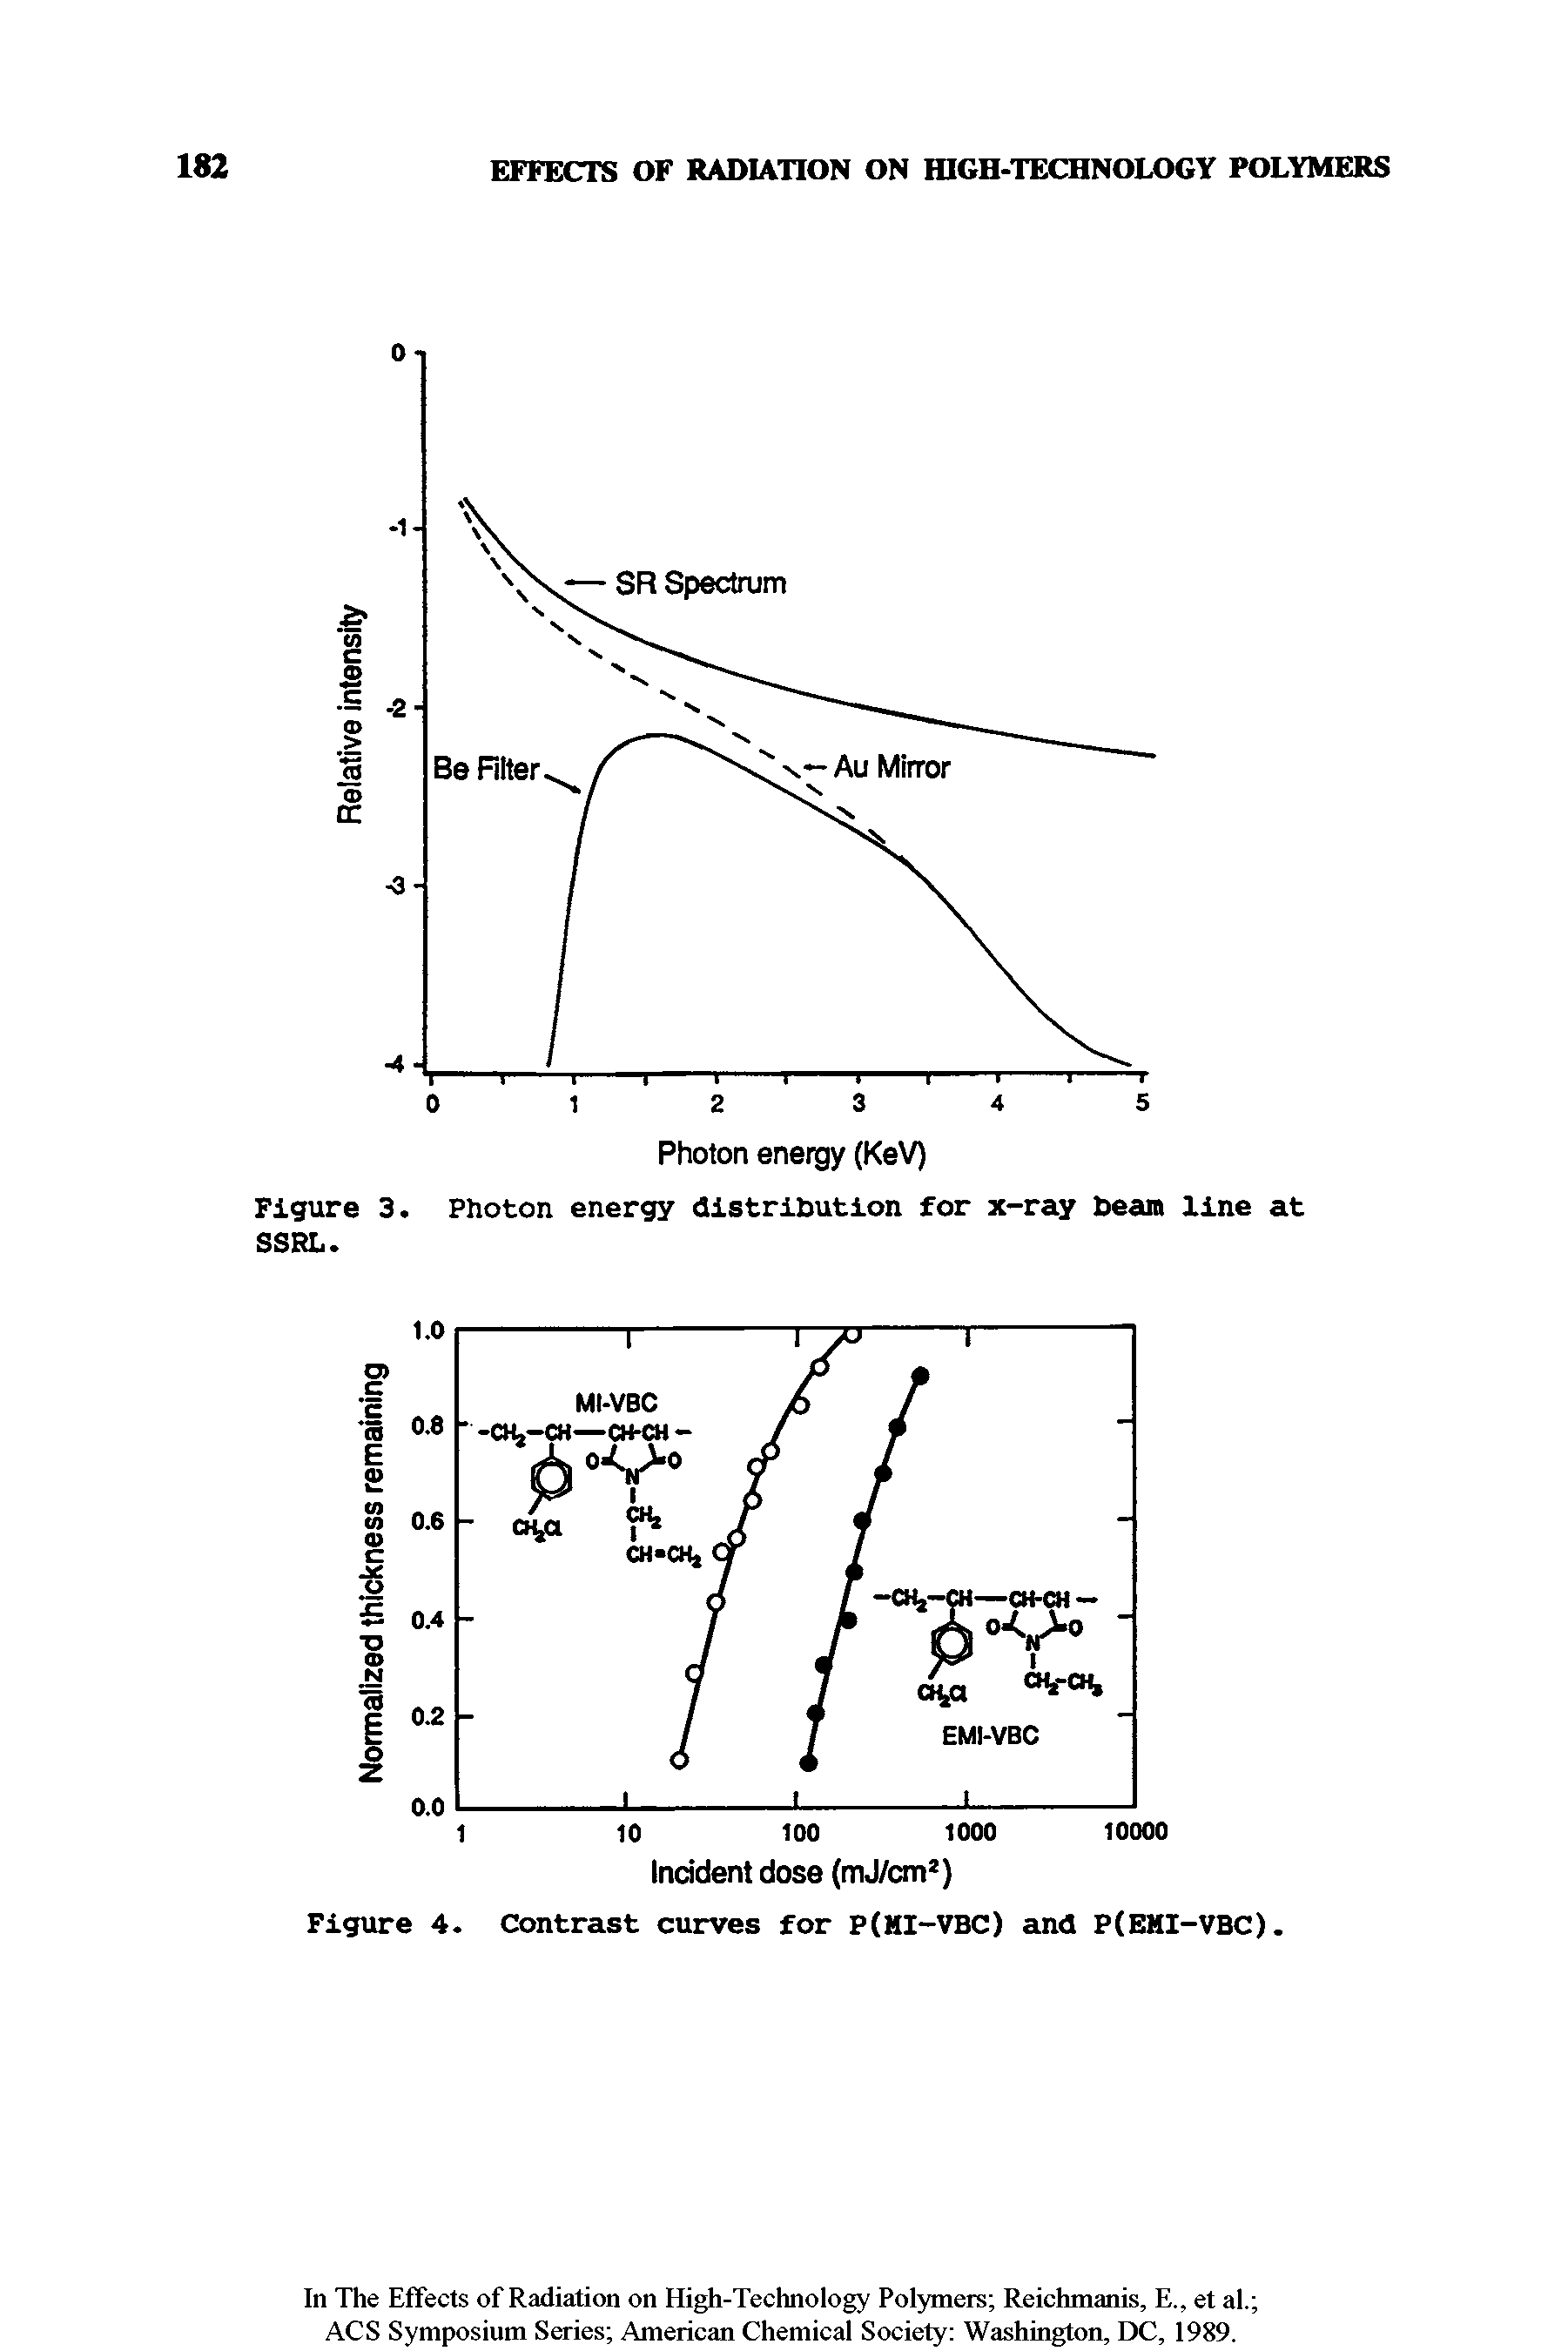 Figure 3. Photon energy distribution for x-ray beam line at SSRL.